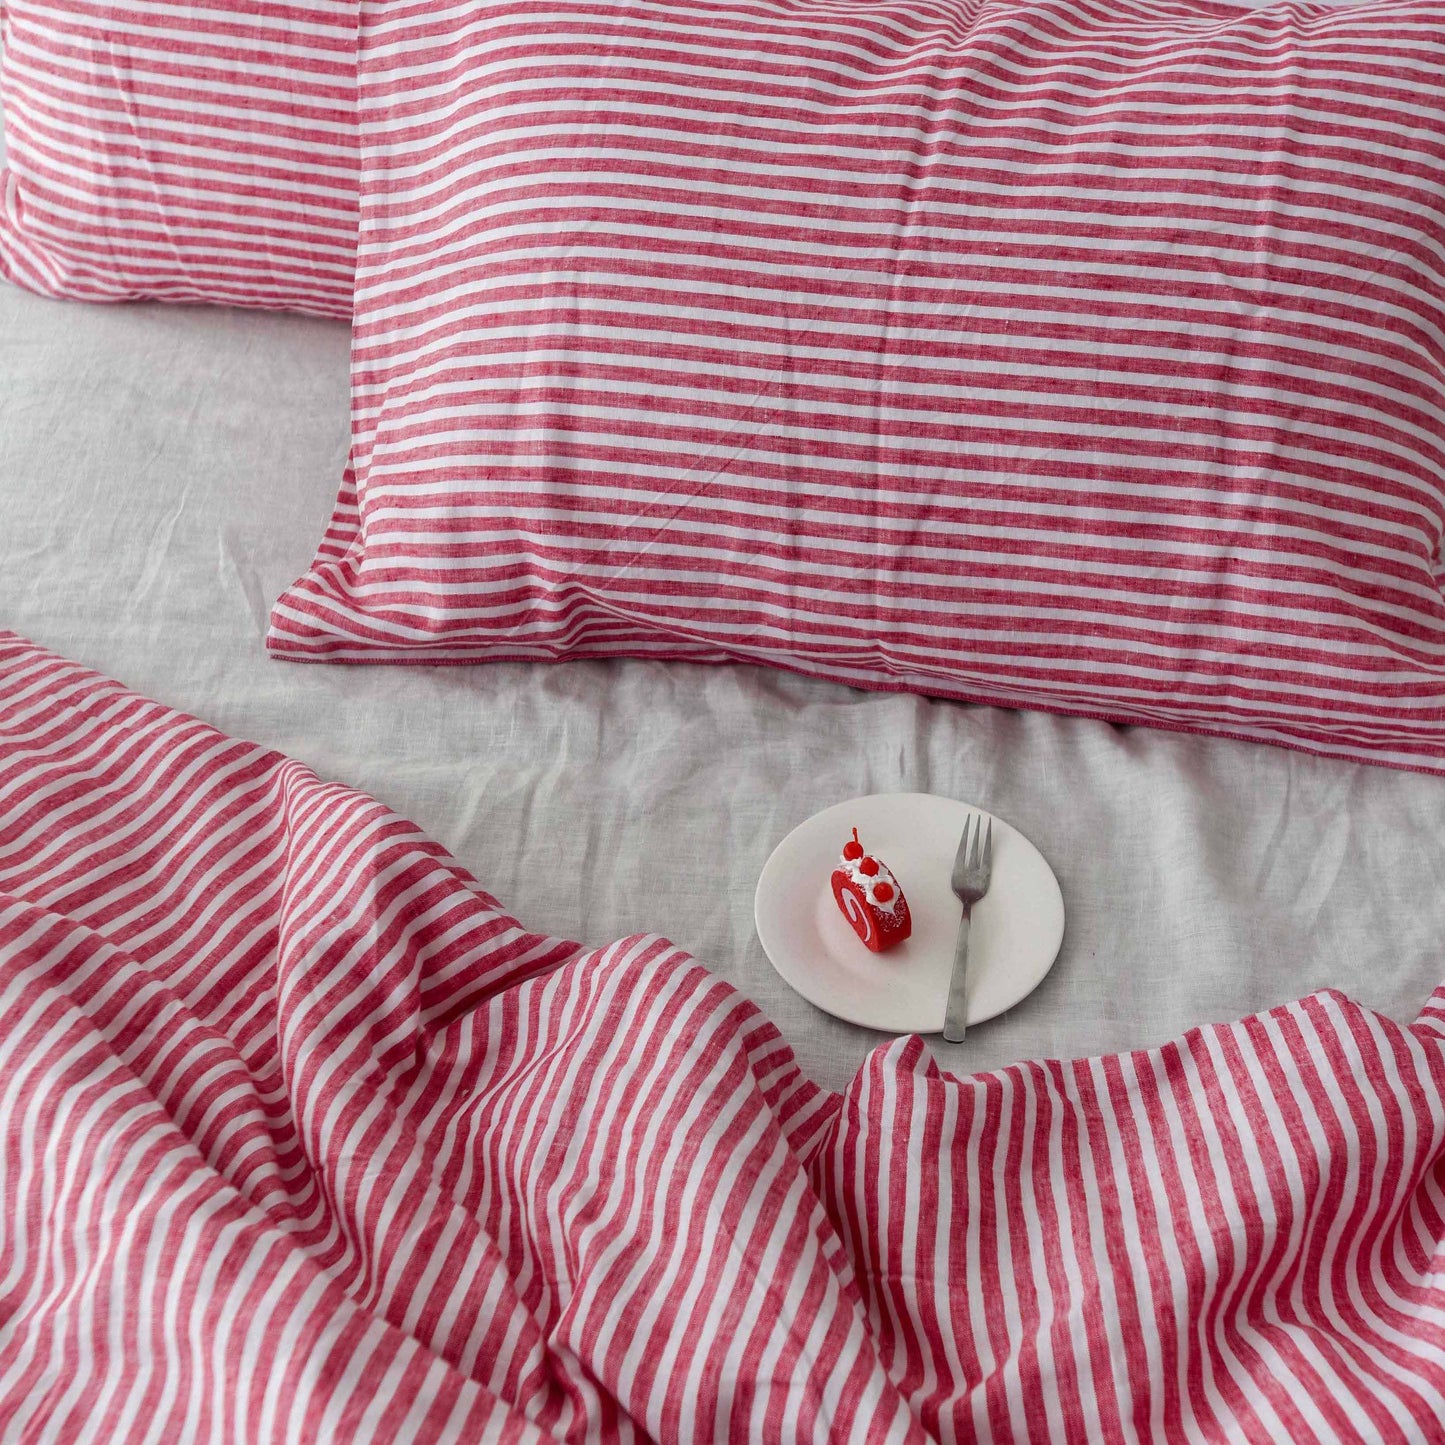 Red Striped French Linen Bedding Sets (4 pieces) - Yarn Dyeing